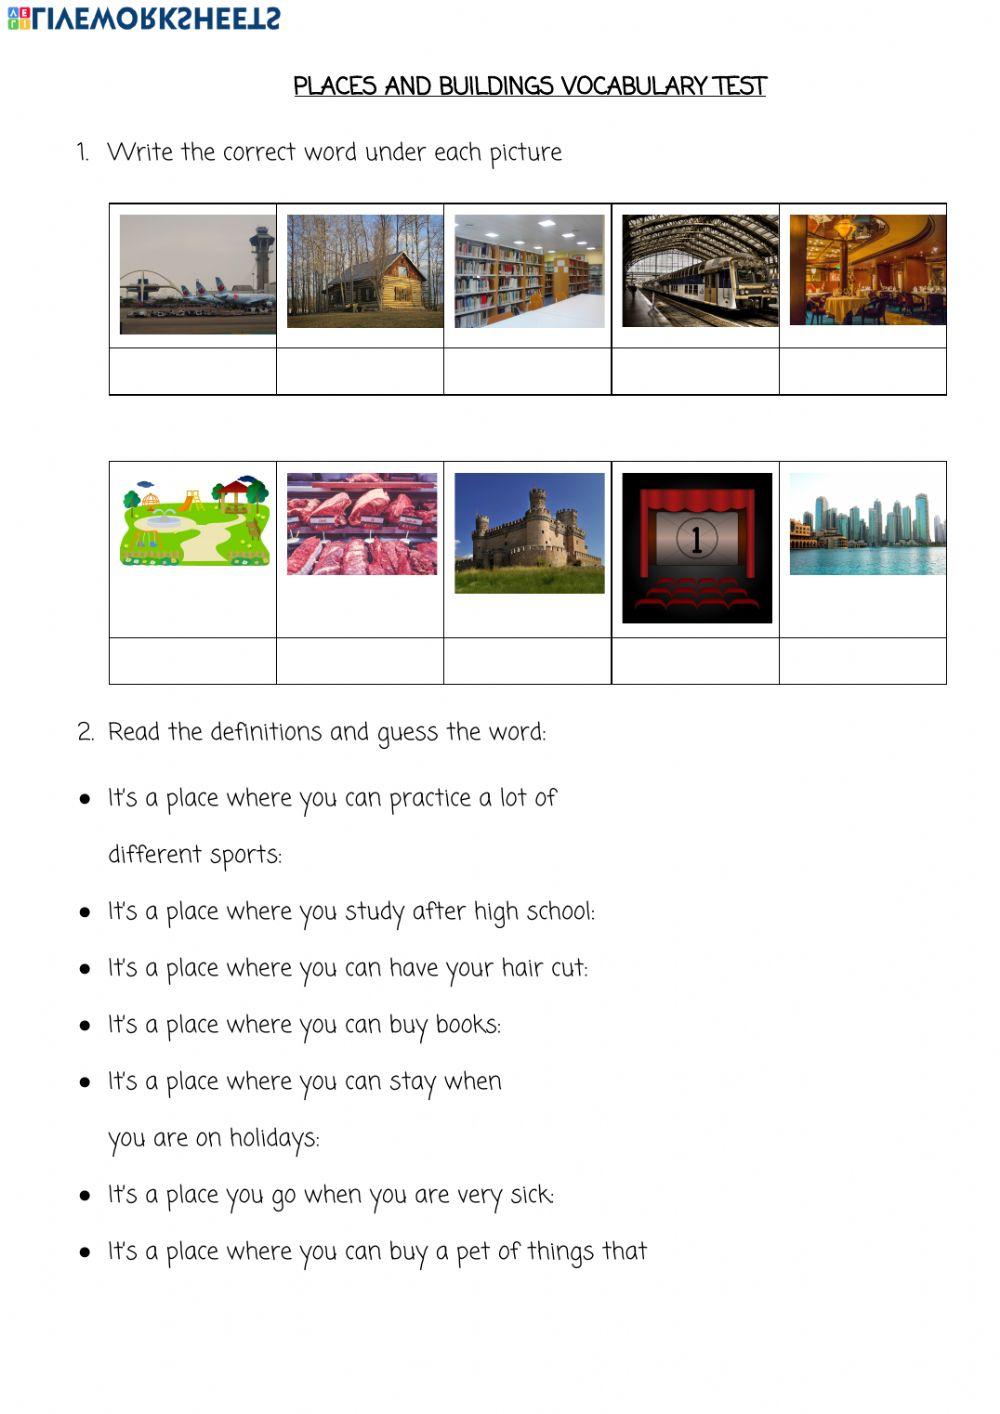 Places and buildings vocabulary